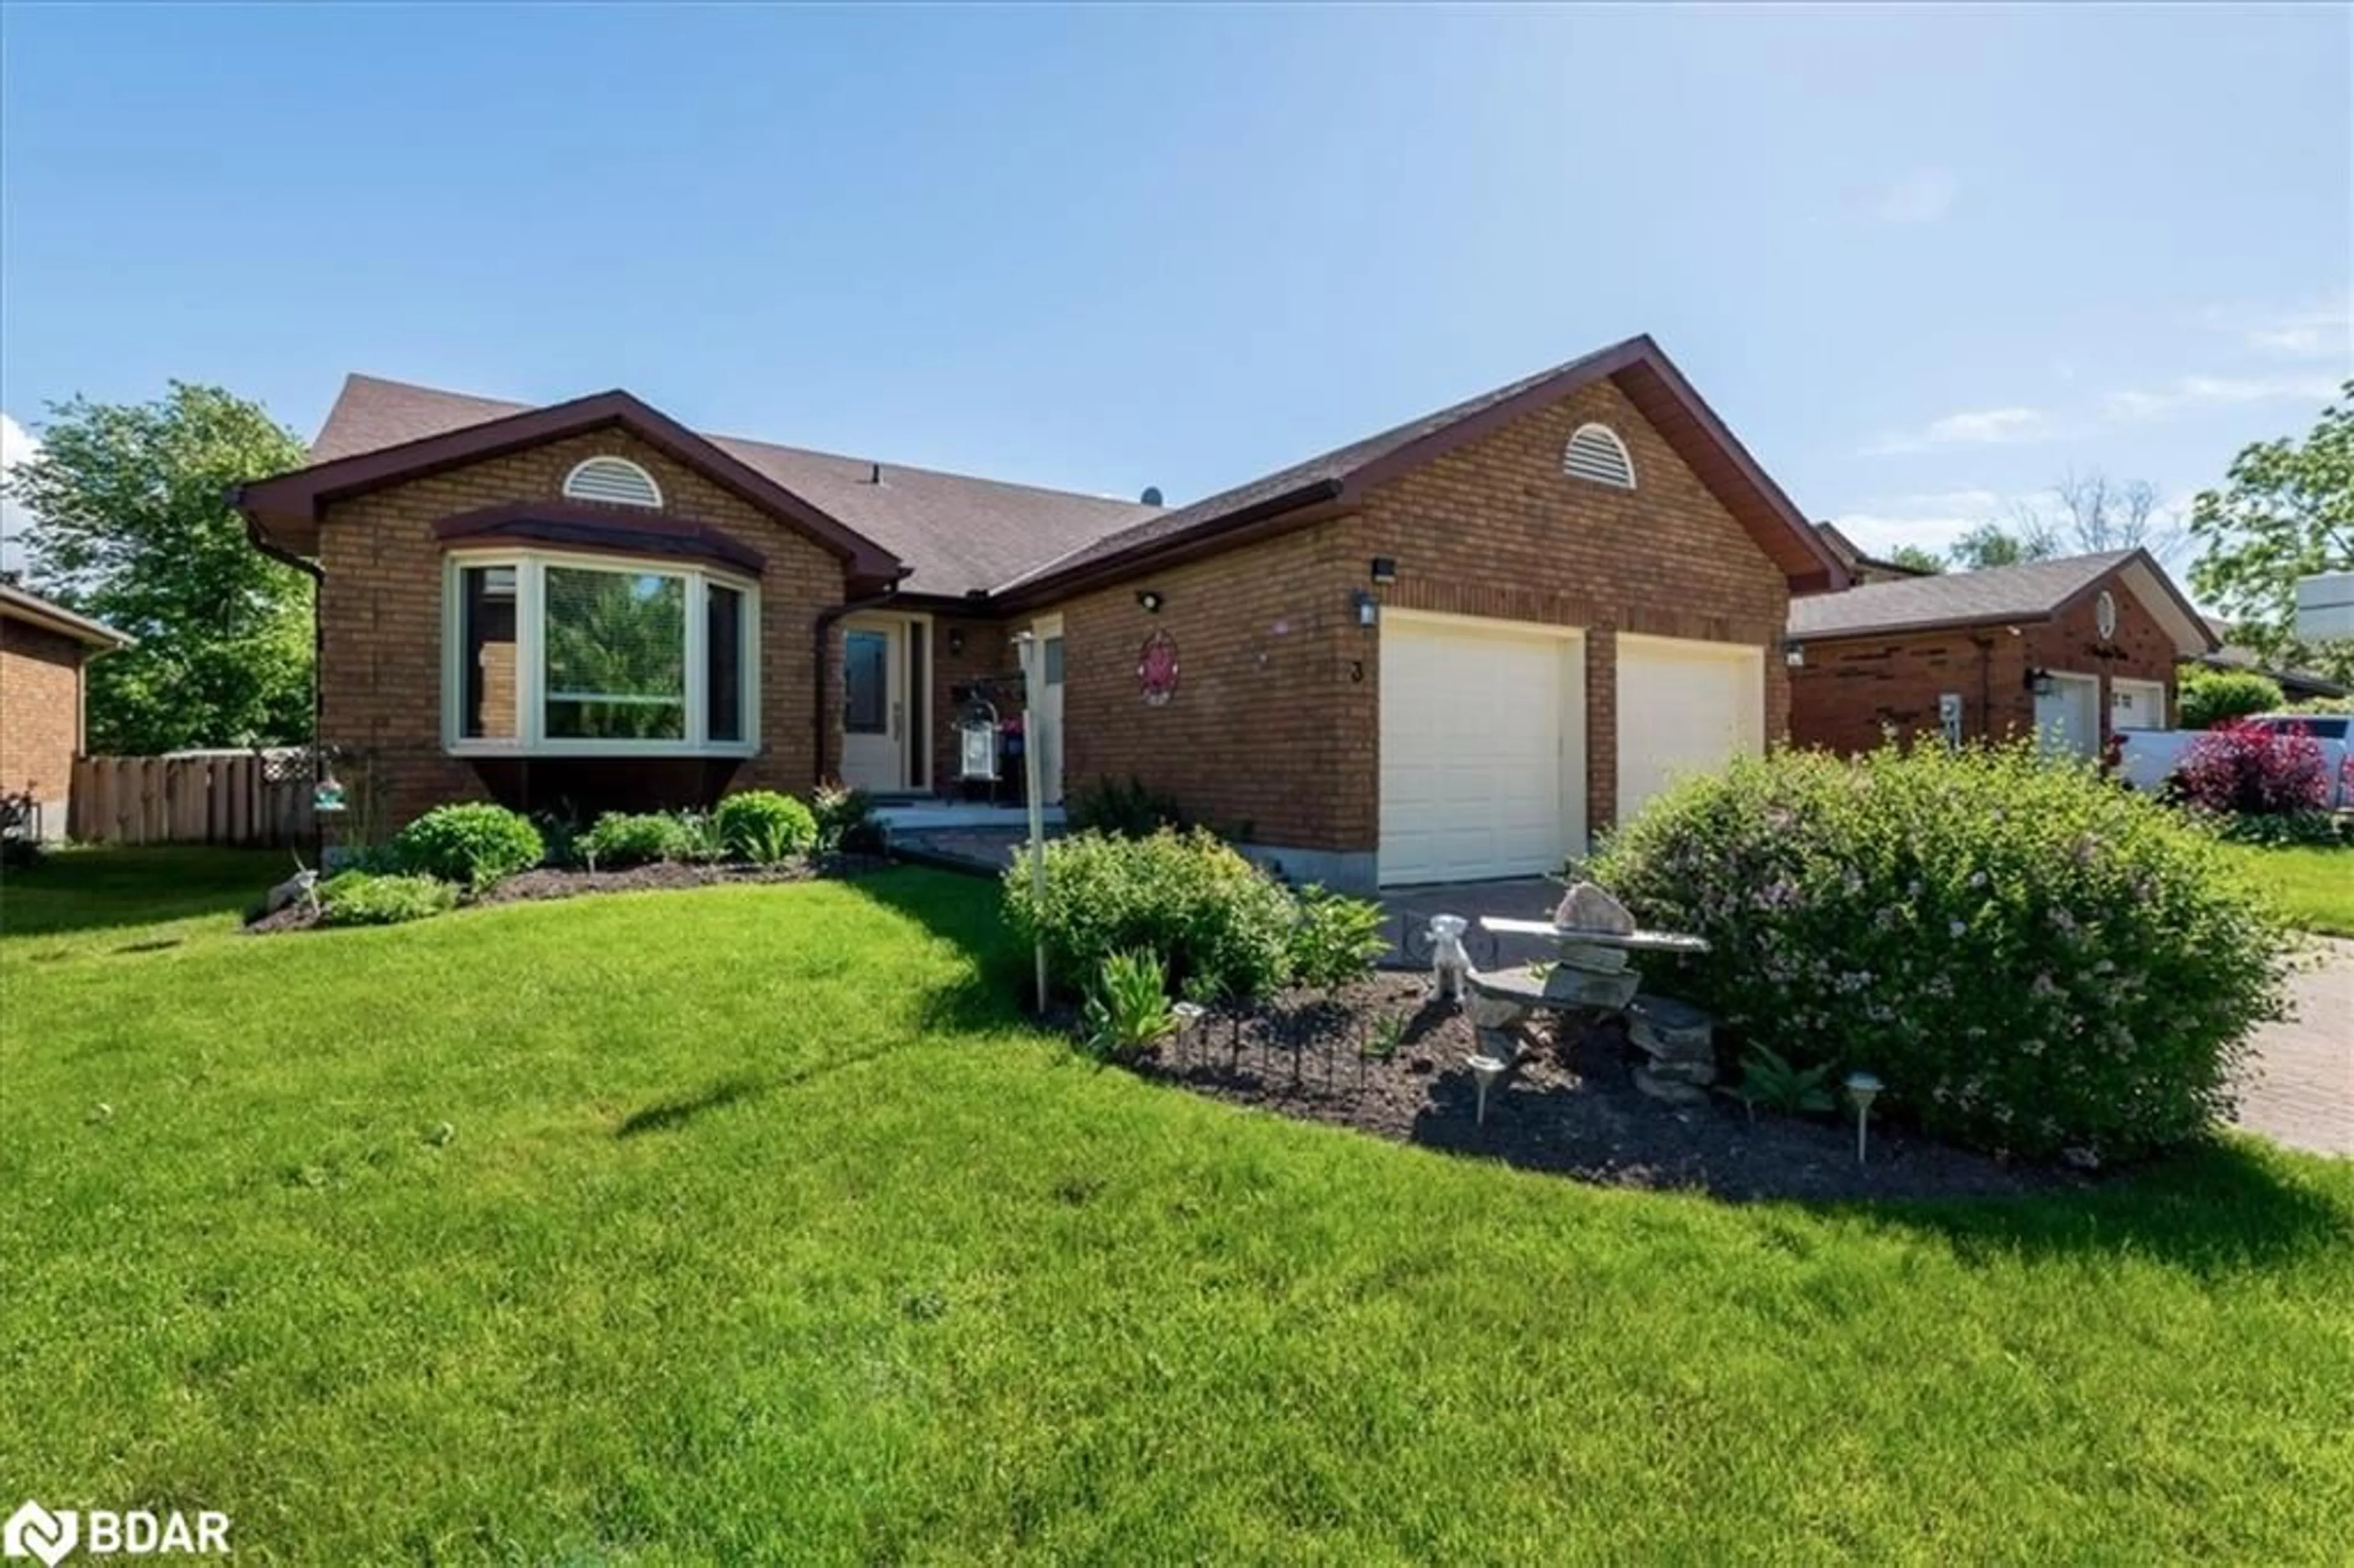 Home with brick exterior material for 3 Douglas Dr, Barrie Ontario L4M 5R8